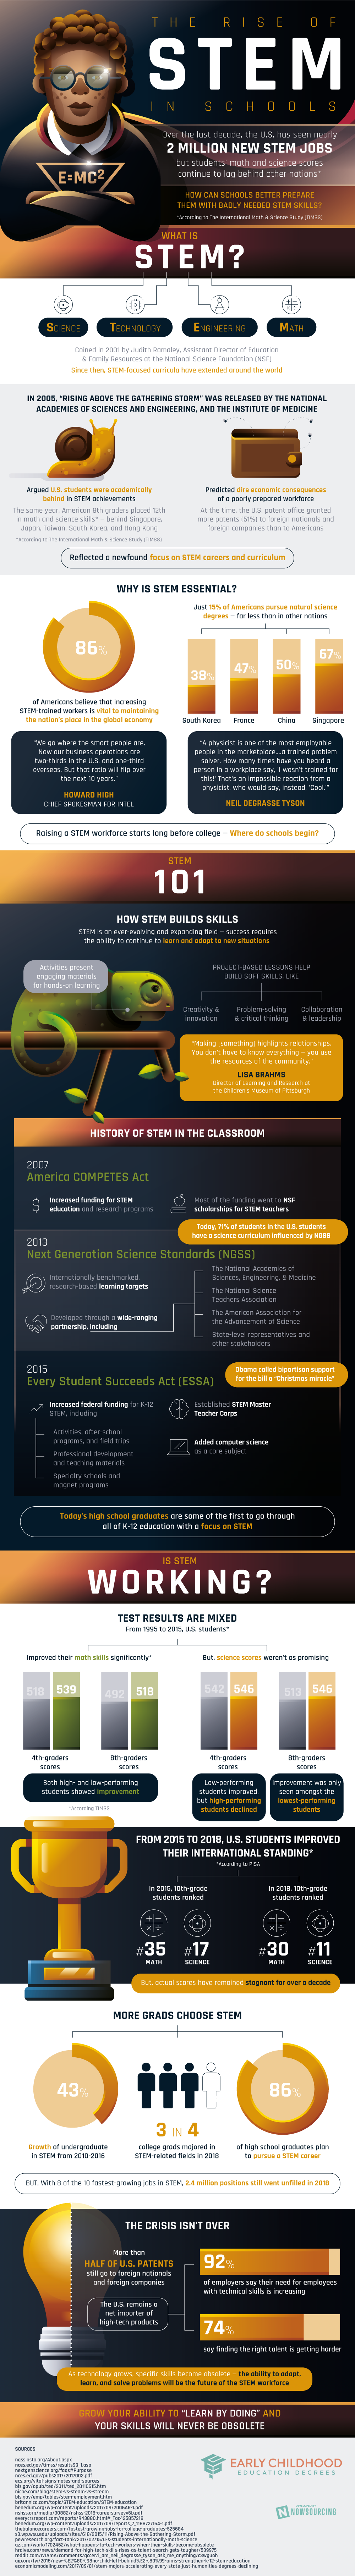 The Rise of Stem in Schools